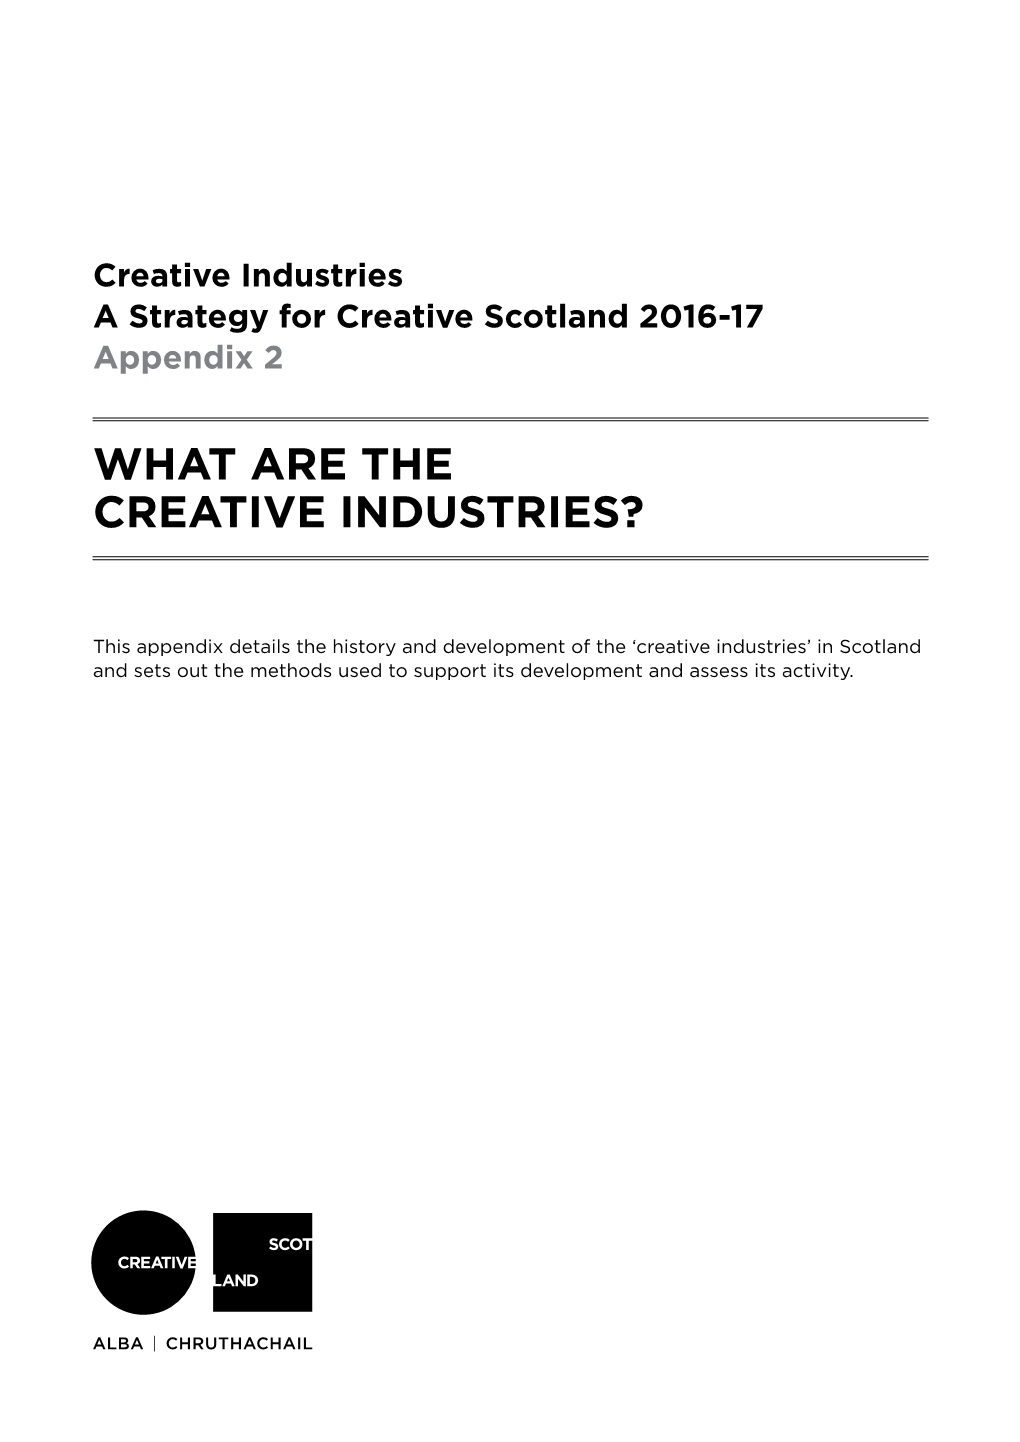 What Are the Creative Industries?